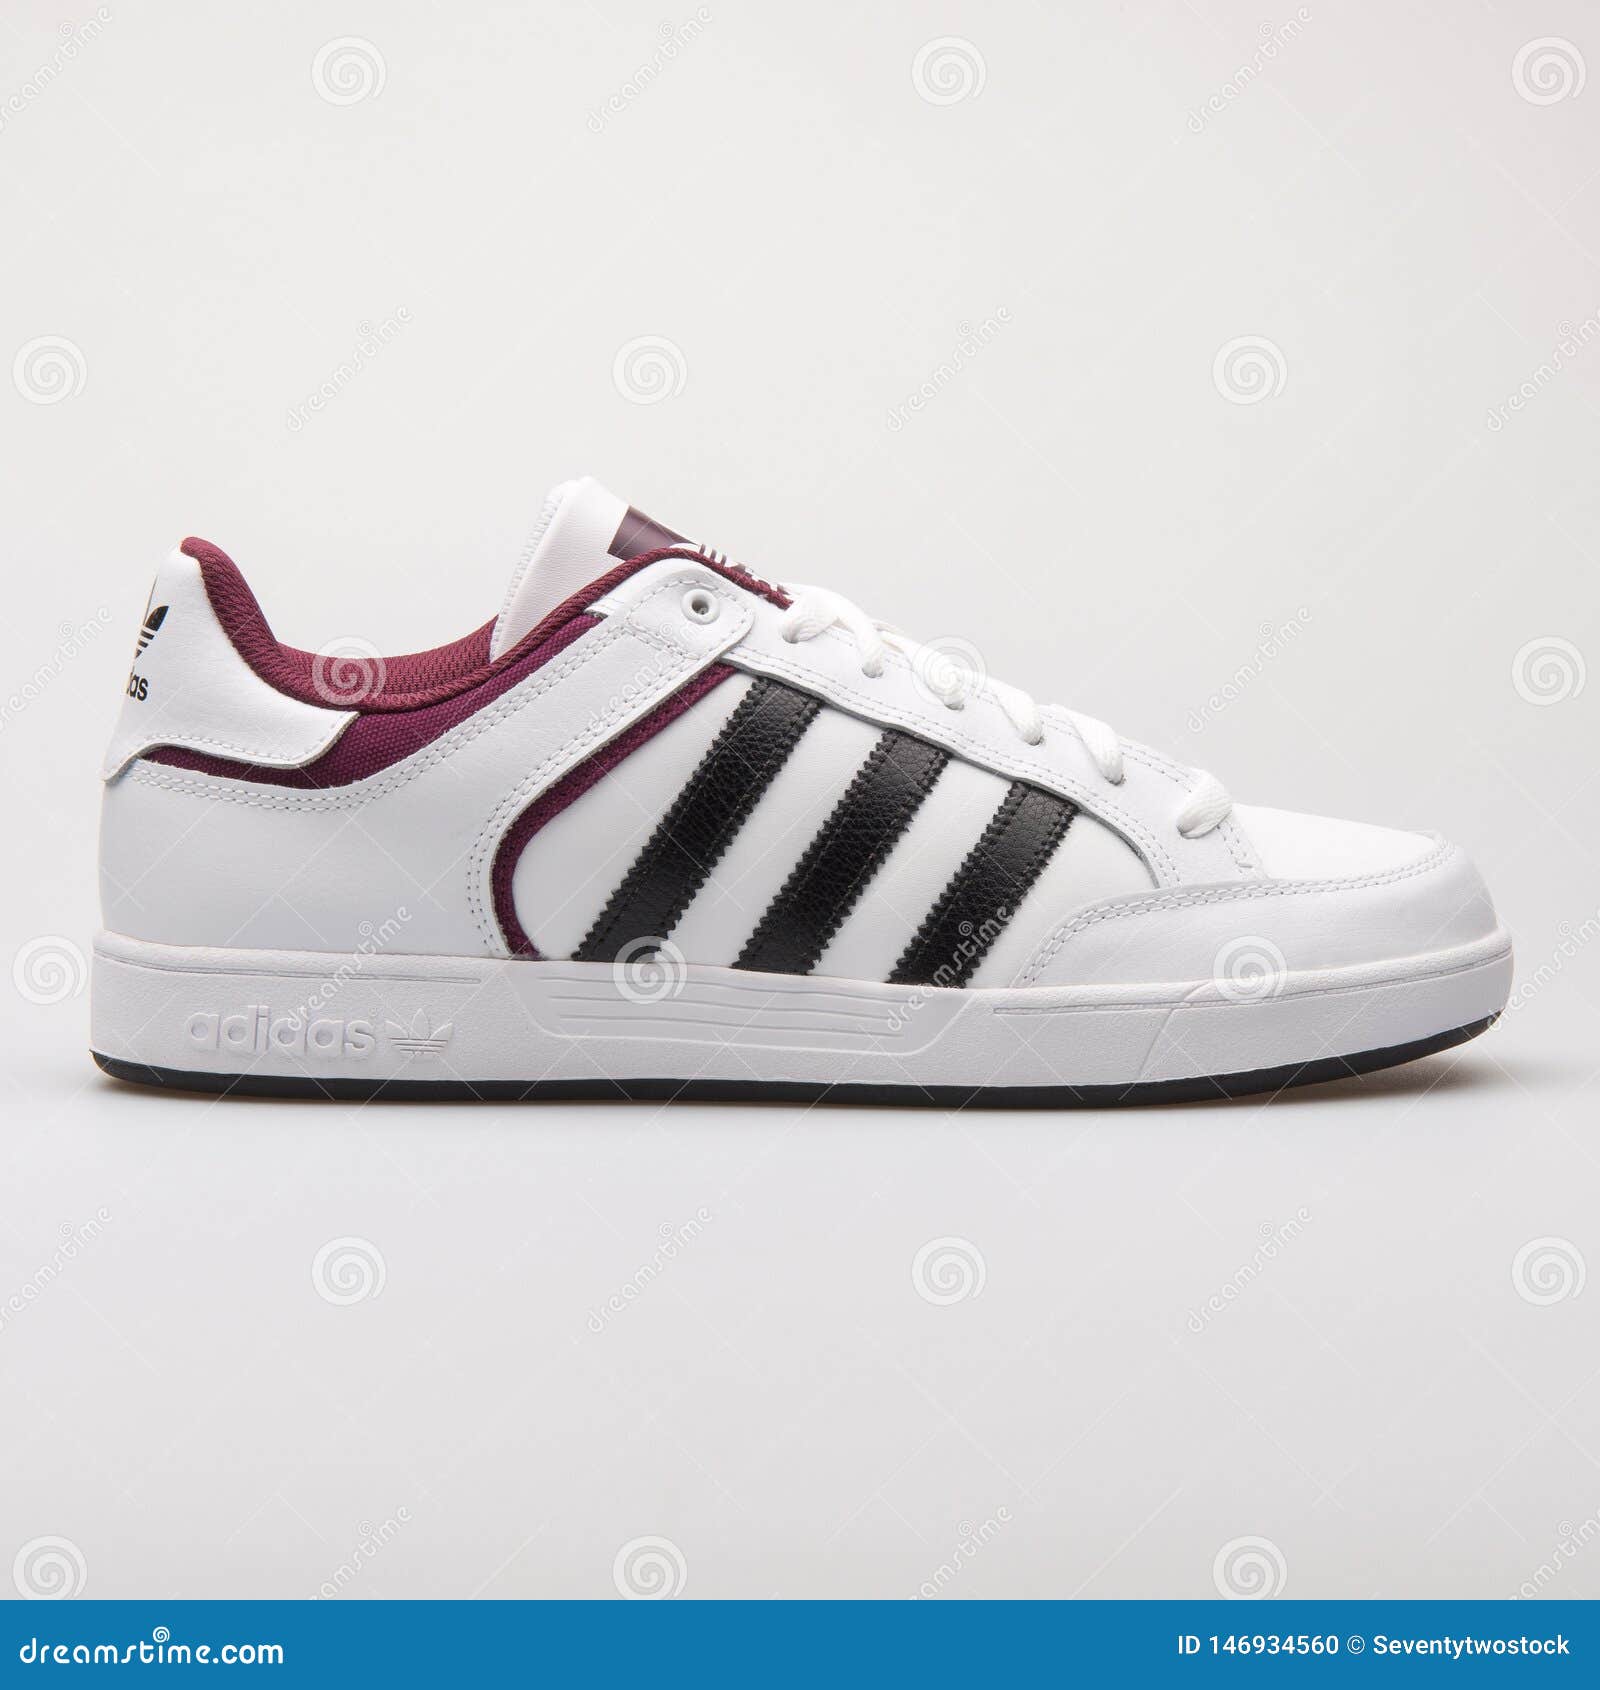 Adidas Varial Low White, Burgundy and Black Sneaker Editorial Image - Image  of mens, adidas: 146934560